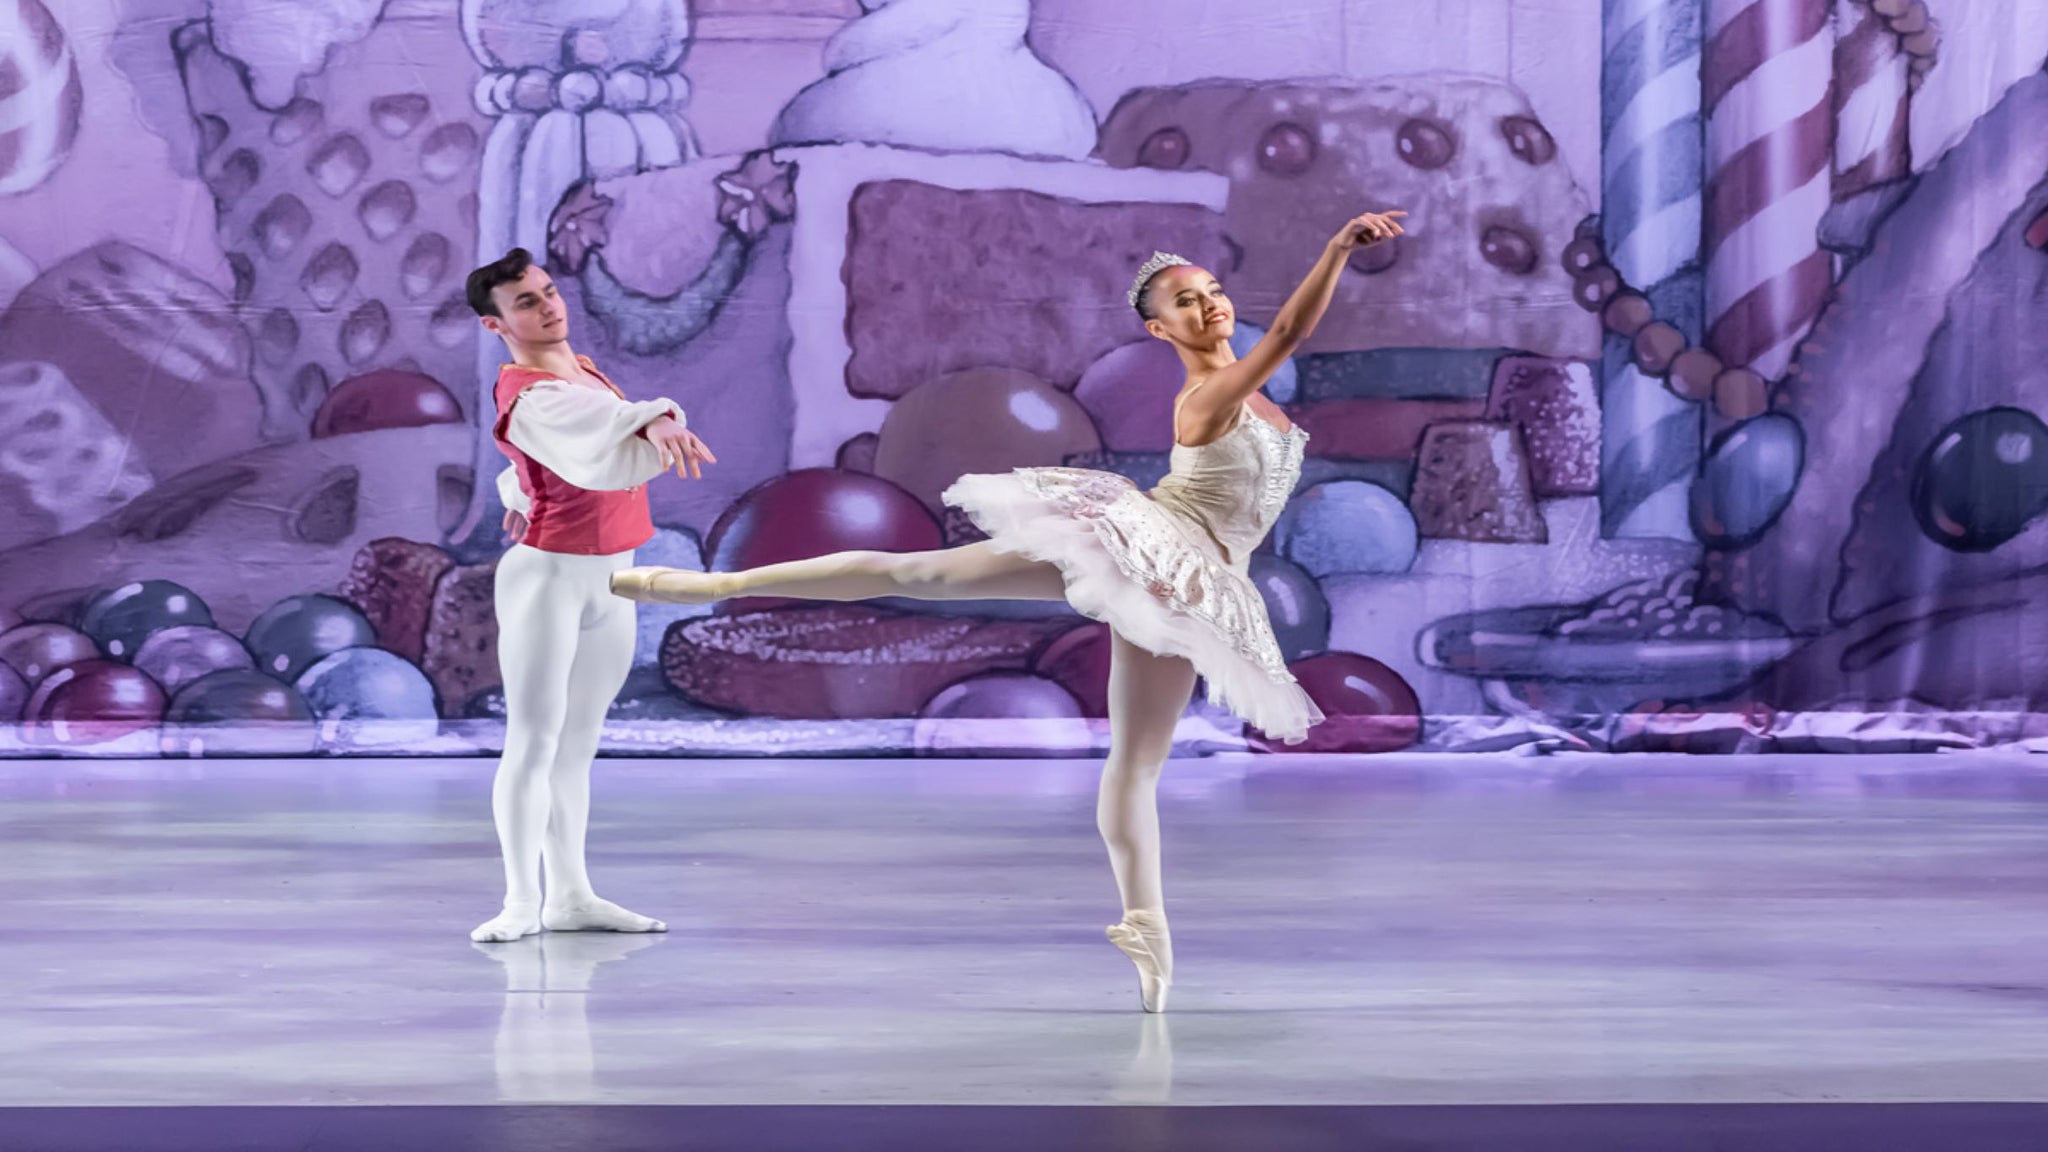 Cary Ballet Company Nutcracker 2:00 Performance presale code for show tickets in Raleigh, NC (Martin Marietta Center for the Performing Arts (fka Duke Energy))